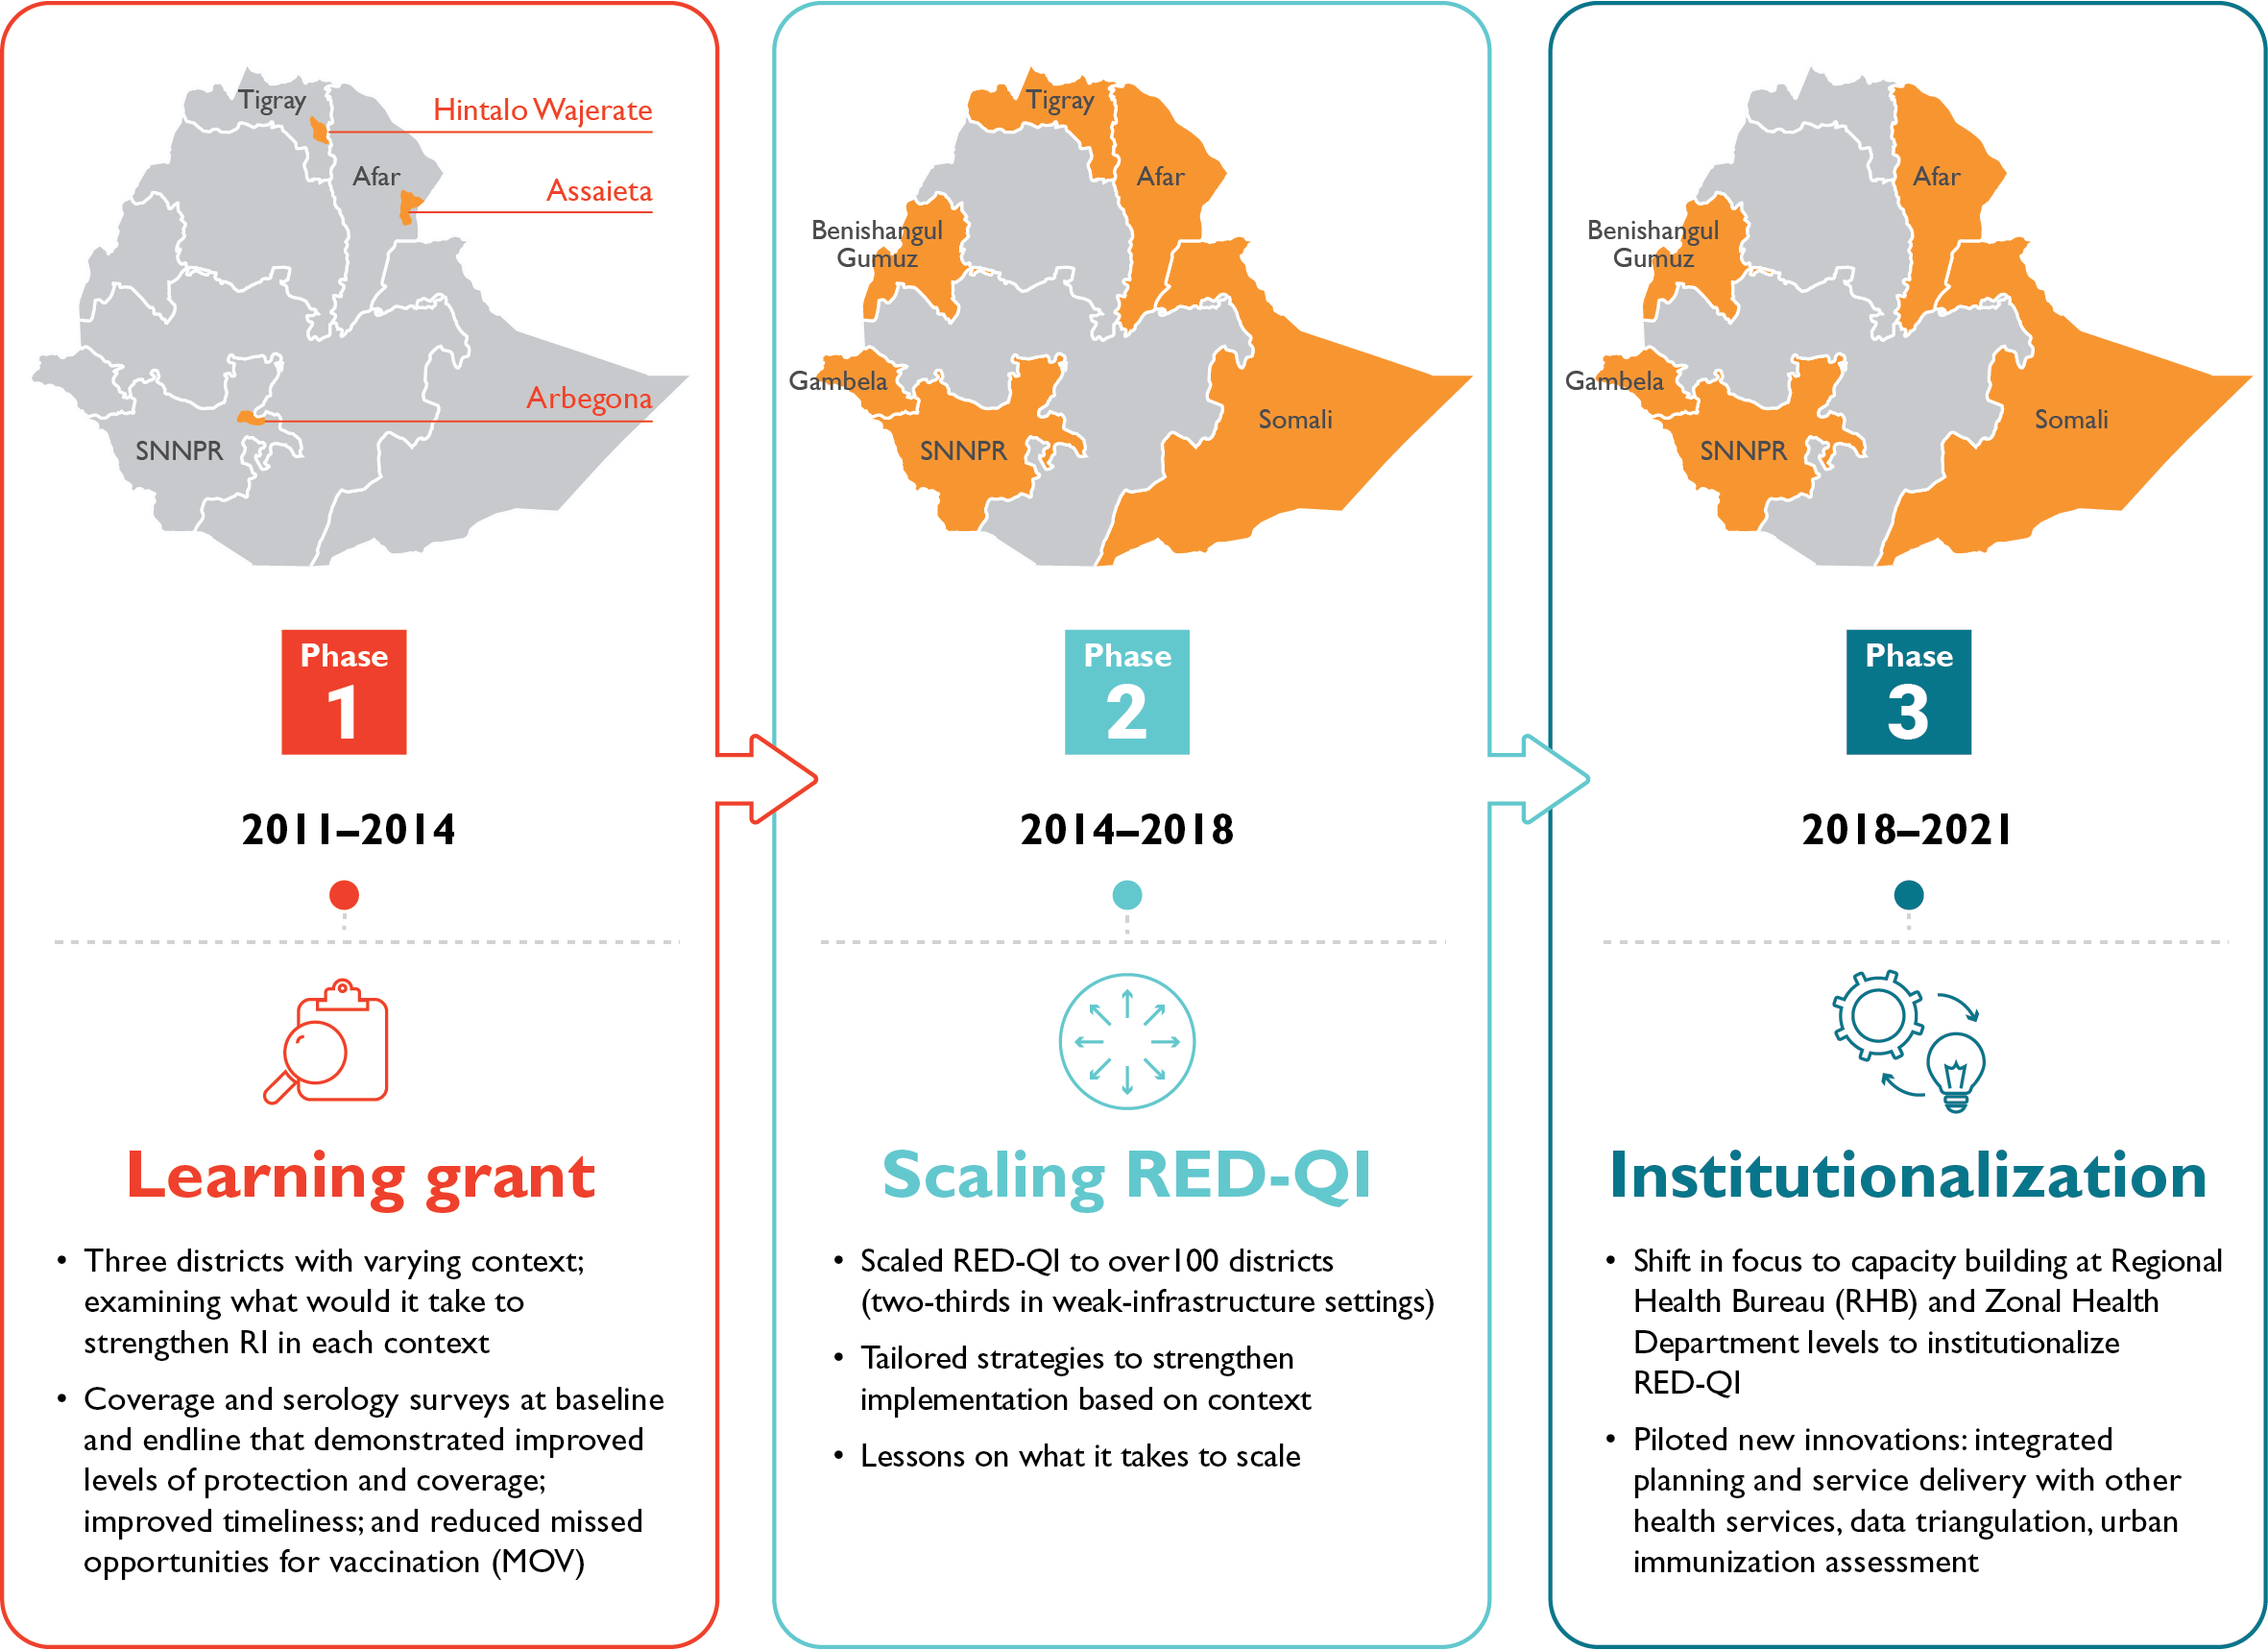 image depicts three phases of the UI-FHS project - Phase 1: Learning grant (2011-2014) (Hintalo Wajerate in Tigray, Assaieta in Afar, and Arbegona in SNNPR); Phase 2: Scaling RED-QI (2014-2018) (Afar, Benishangul Gumuz, Gambela, SNNPR, Somali, Tigray); Phase 3: Institutionalization (2018-2021) (Afar, Benishangul Gumuz, Gambela, SNNPR, Somali).